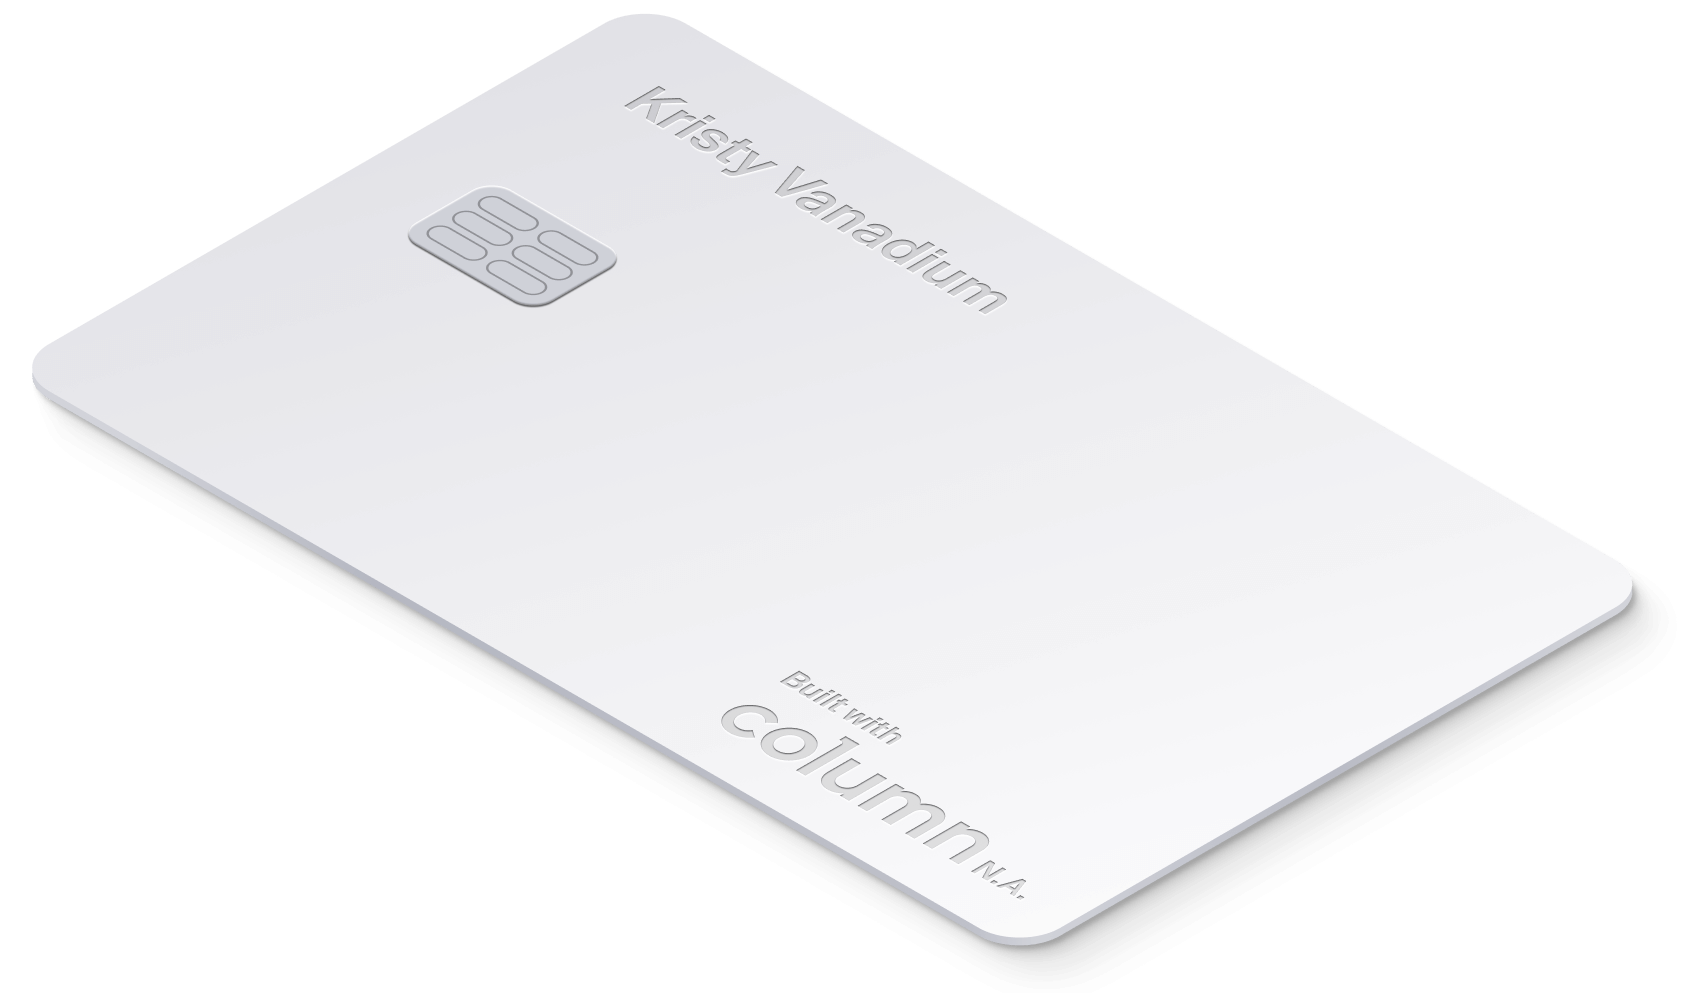 Image of a credit card